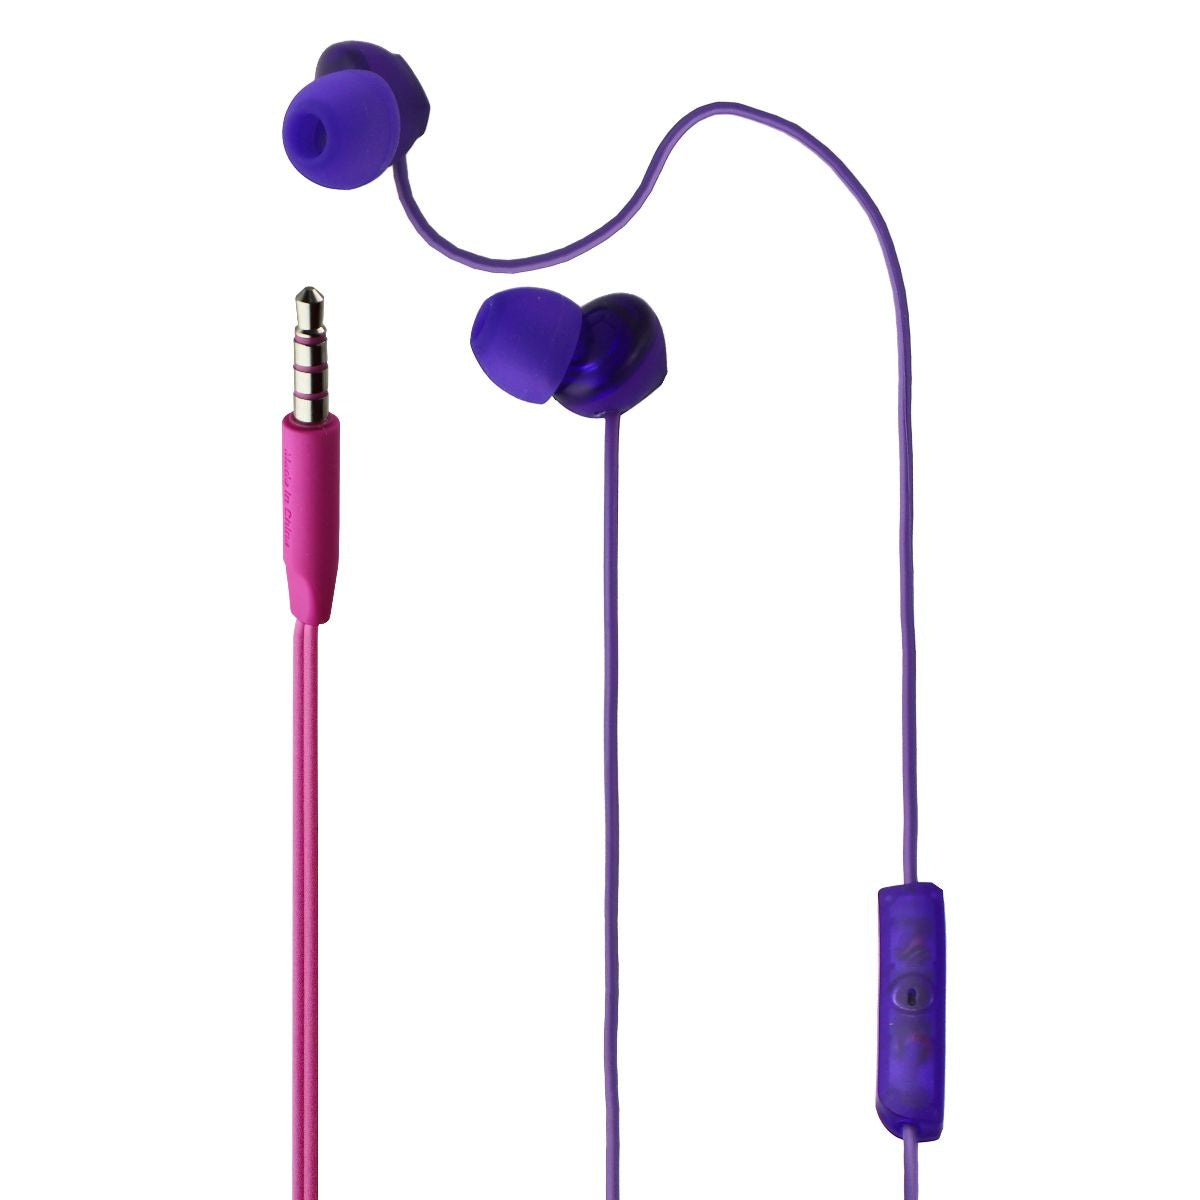 TCL SOCL 300 In-Ear Wired 3.5mm Headphones wit Microphone - Sunrise Purple Portable Audio - Headphones TCL    - Simple Cell Bulk Wholesale Pricing - USA Seller